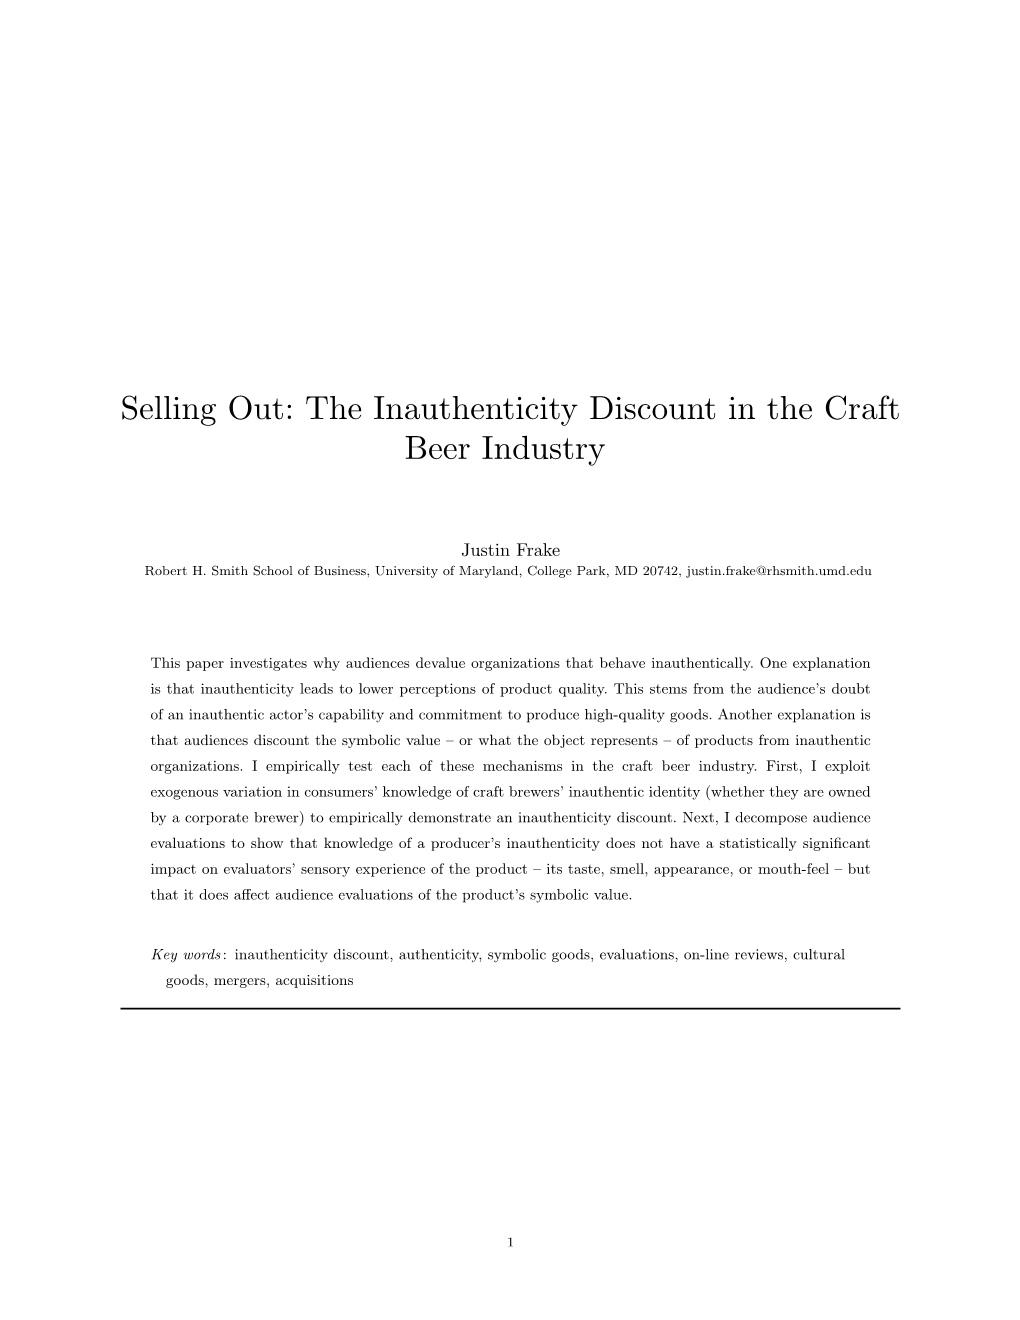 The Inauthenticity Discount in the Craft Beer Industry